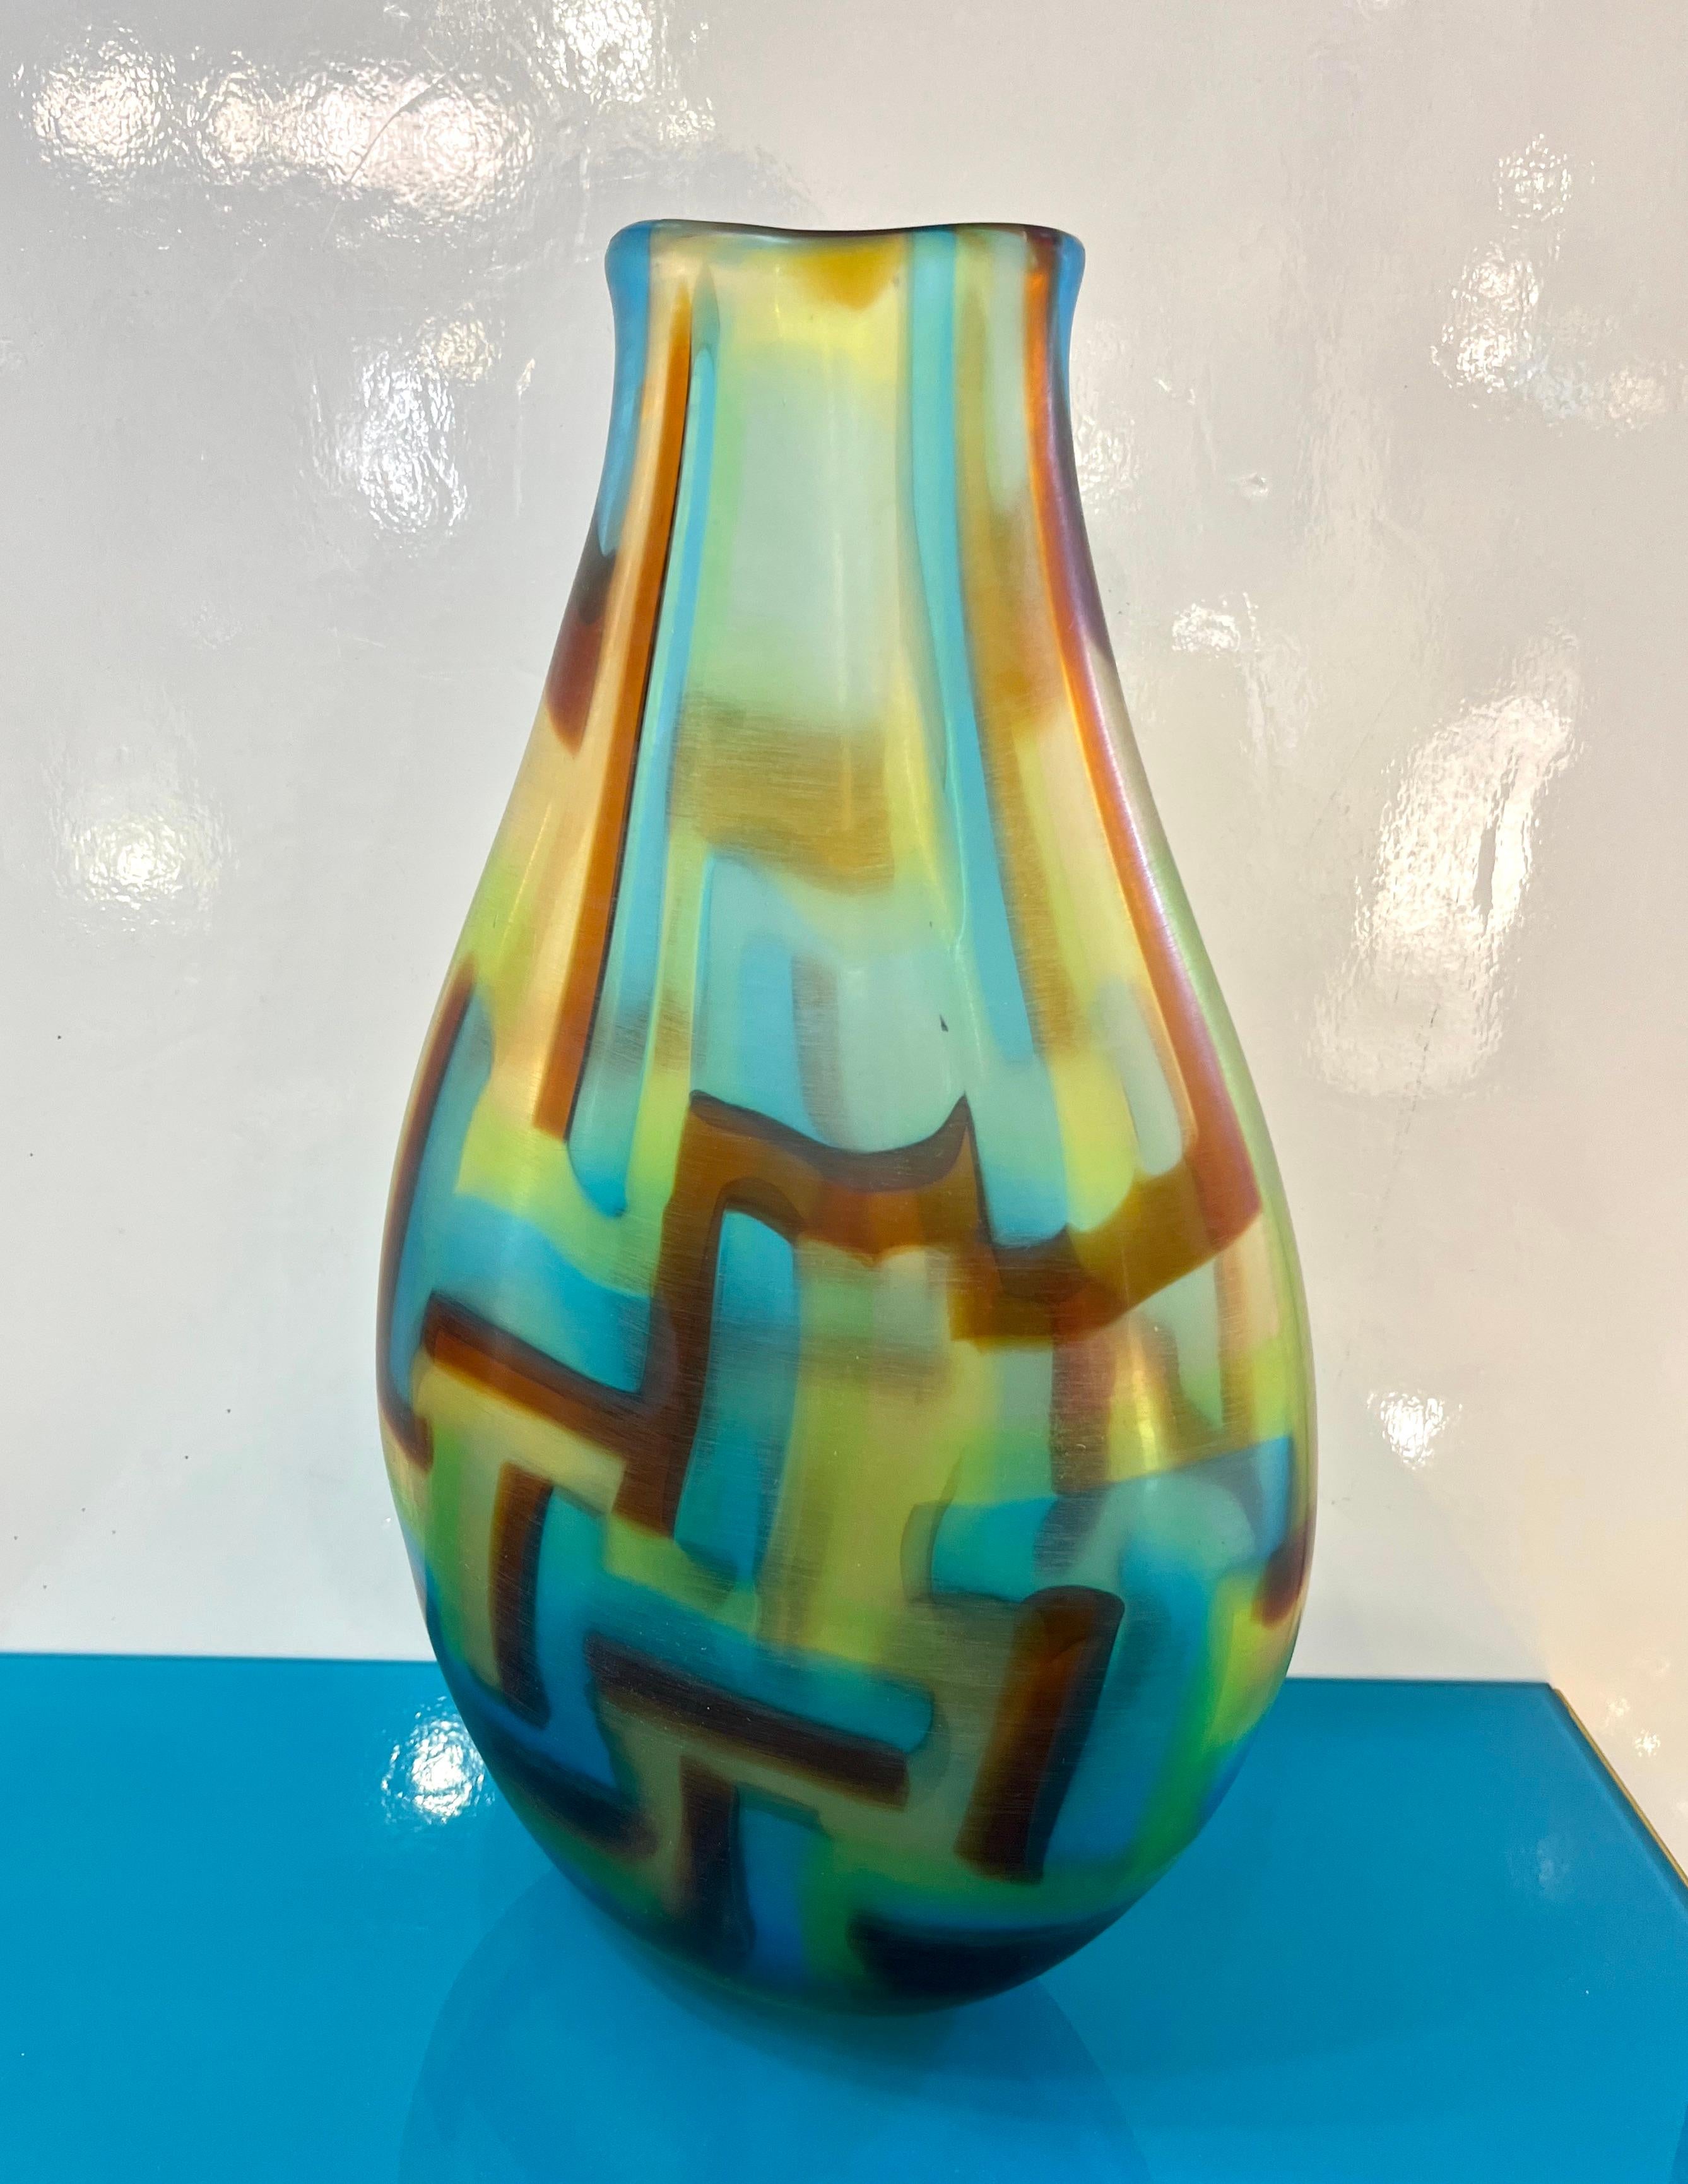 Venetian Murano glass vase, signed by Afro Celotto 2001, worked as an abstract modern painting, with waved edge that adds movement, made precious by the master glassblower's ability to control glass as a painter uses his paintbrush. The overlapping